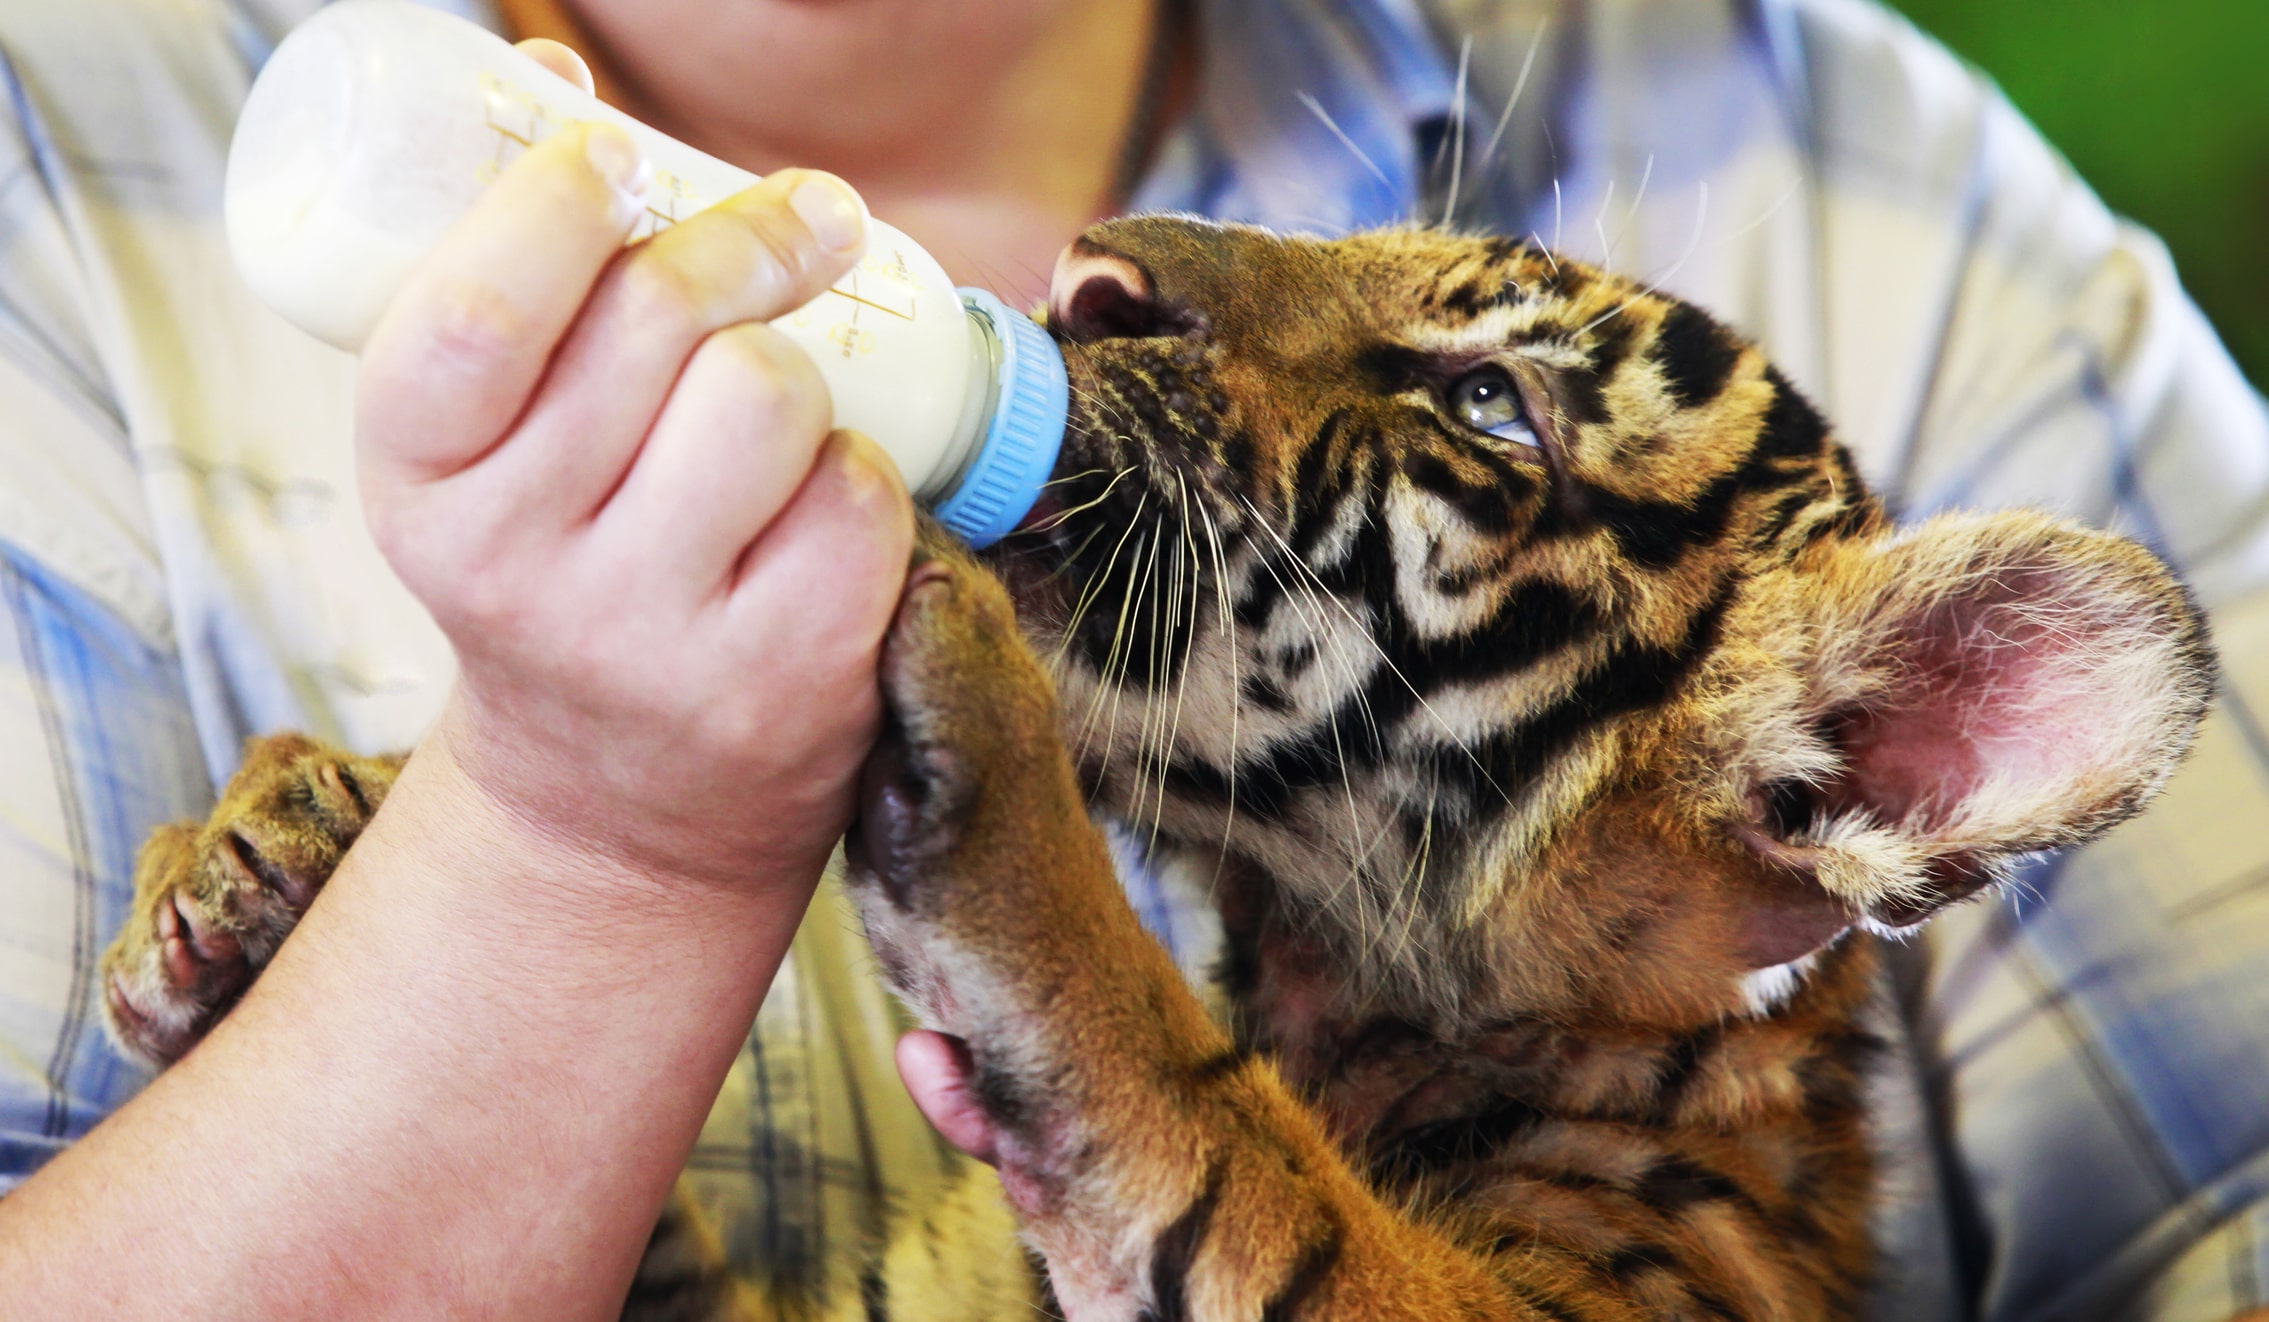 Human using a bottle to feed milk to a tiger cub.